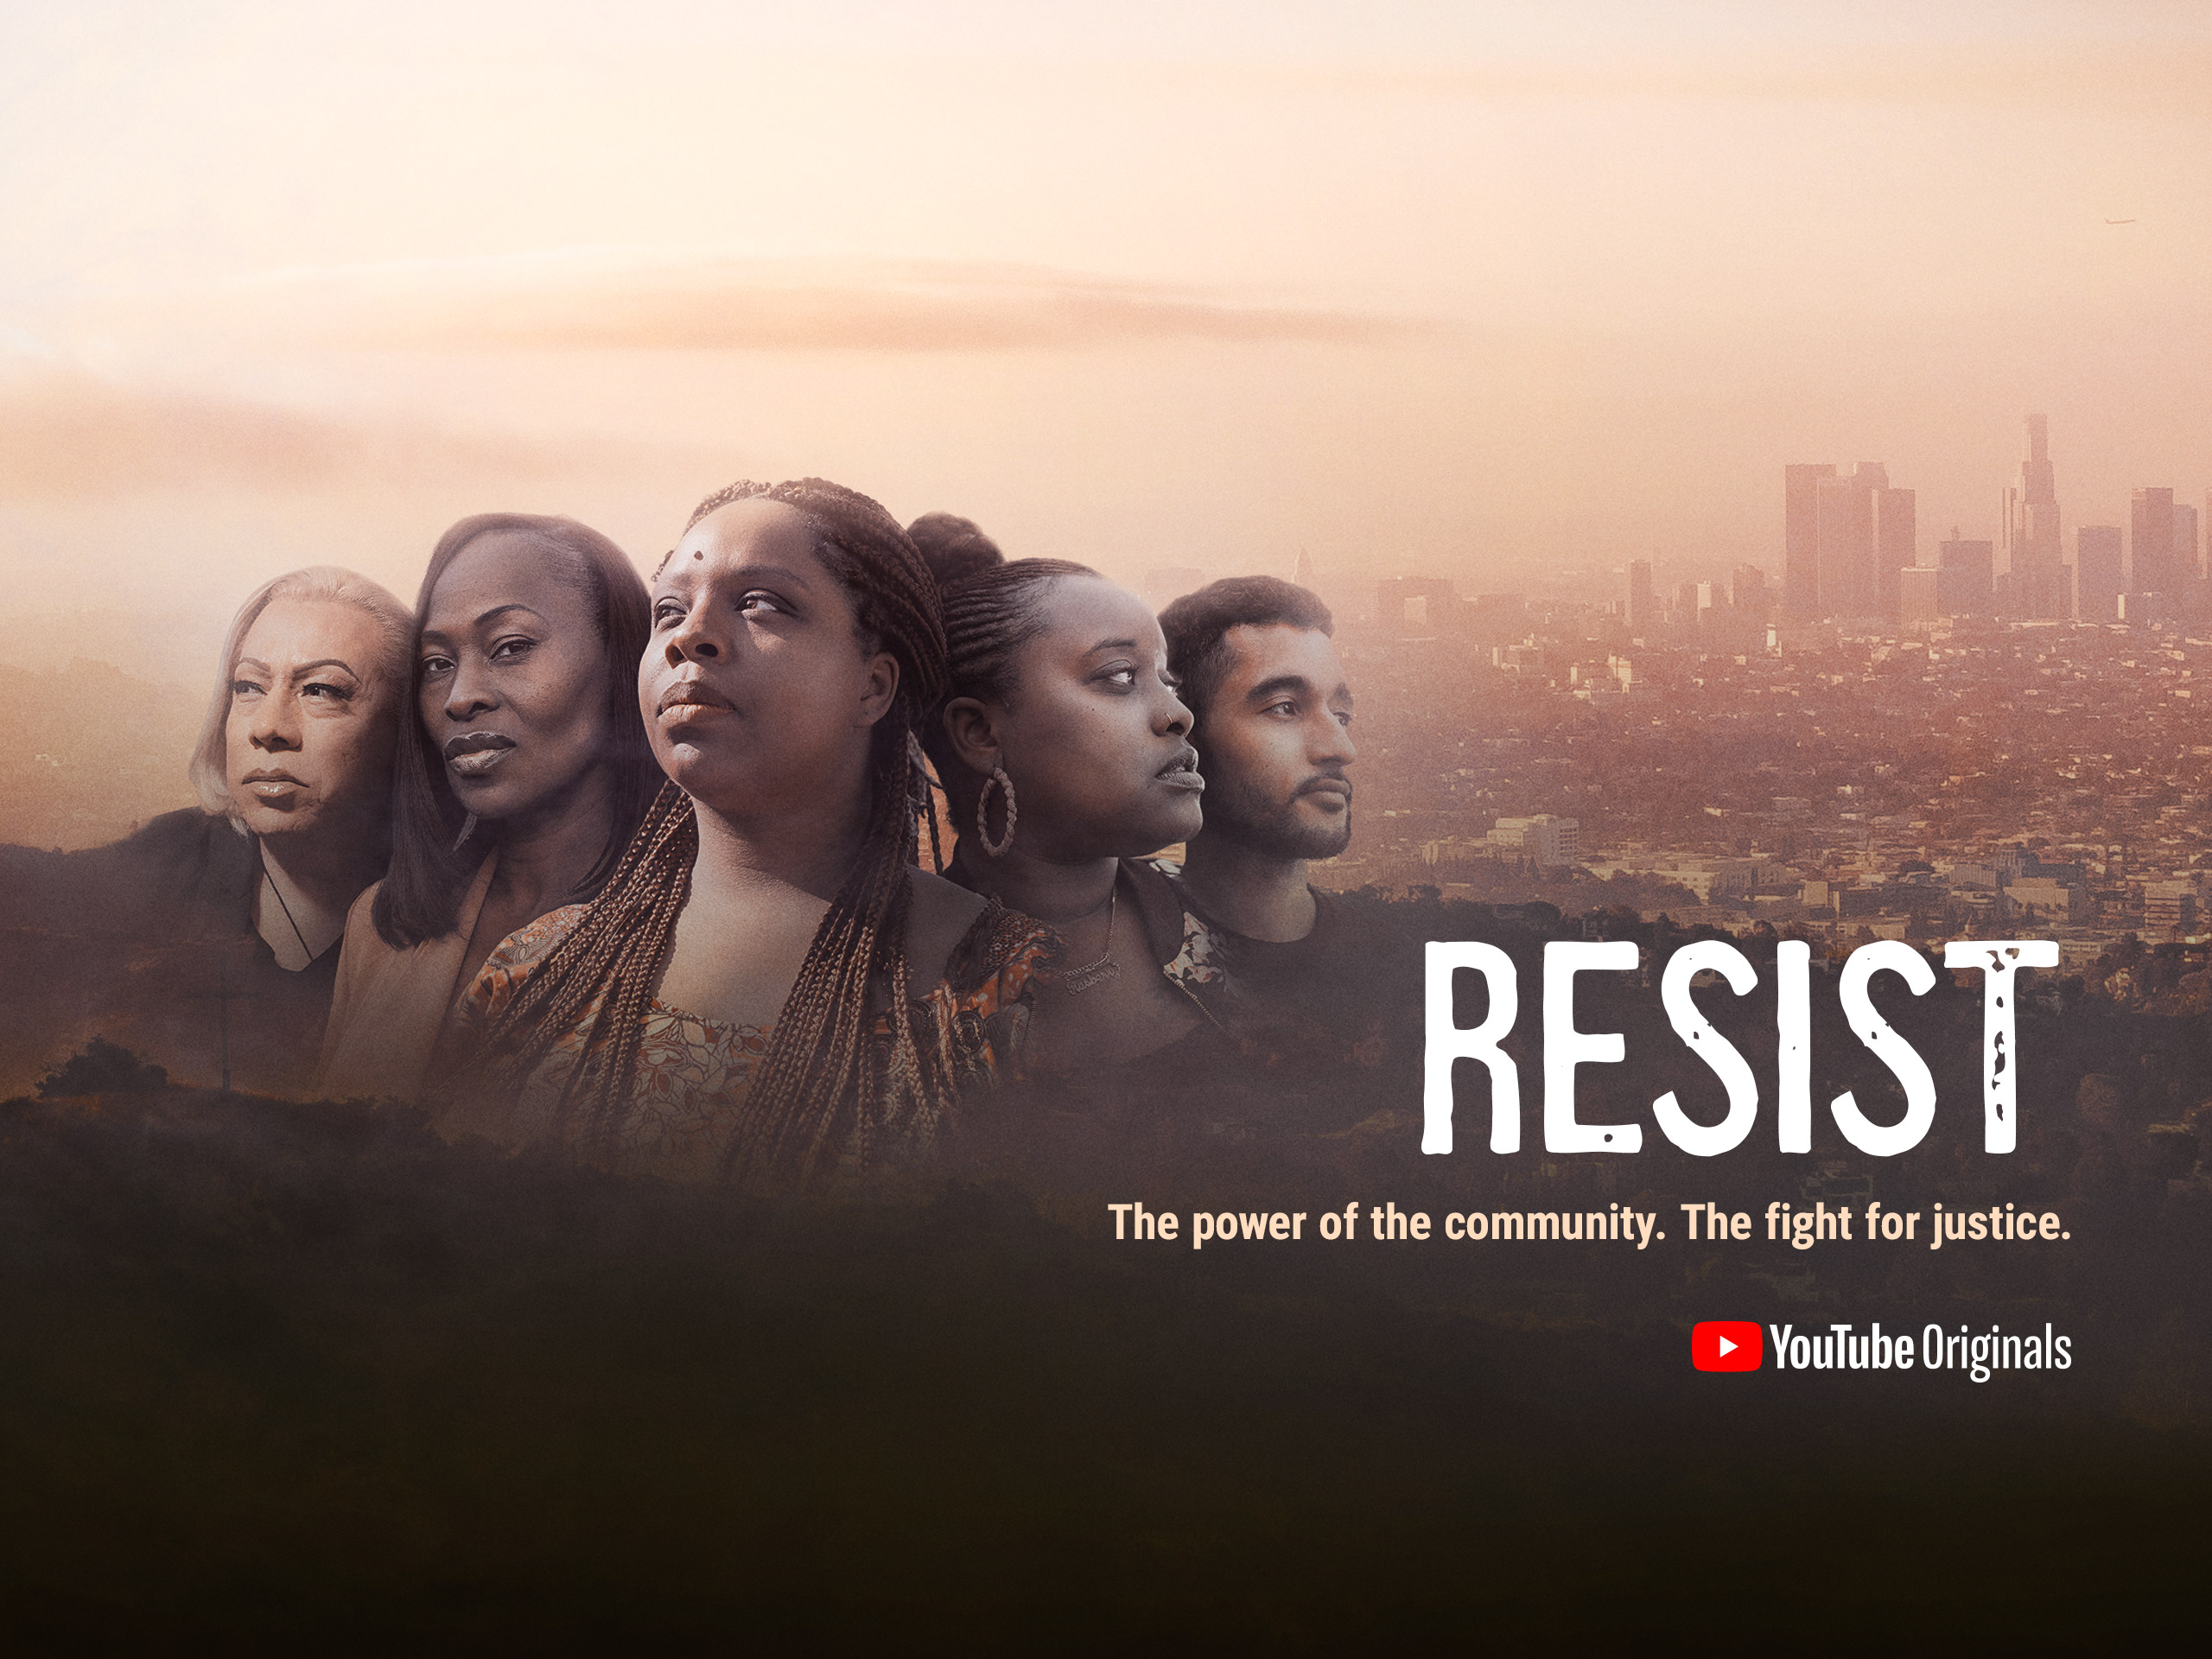 YouTube Originals Releases Official Trailer for “Resist,” a Documentary Series from Patrisse Cullors